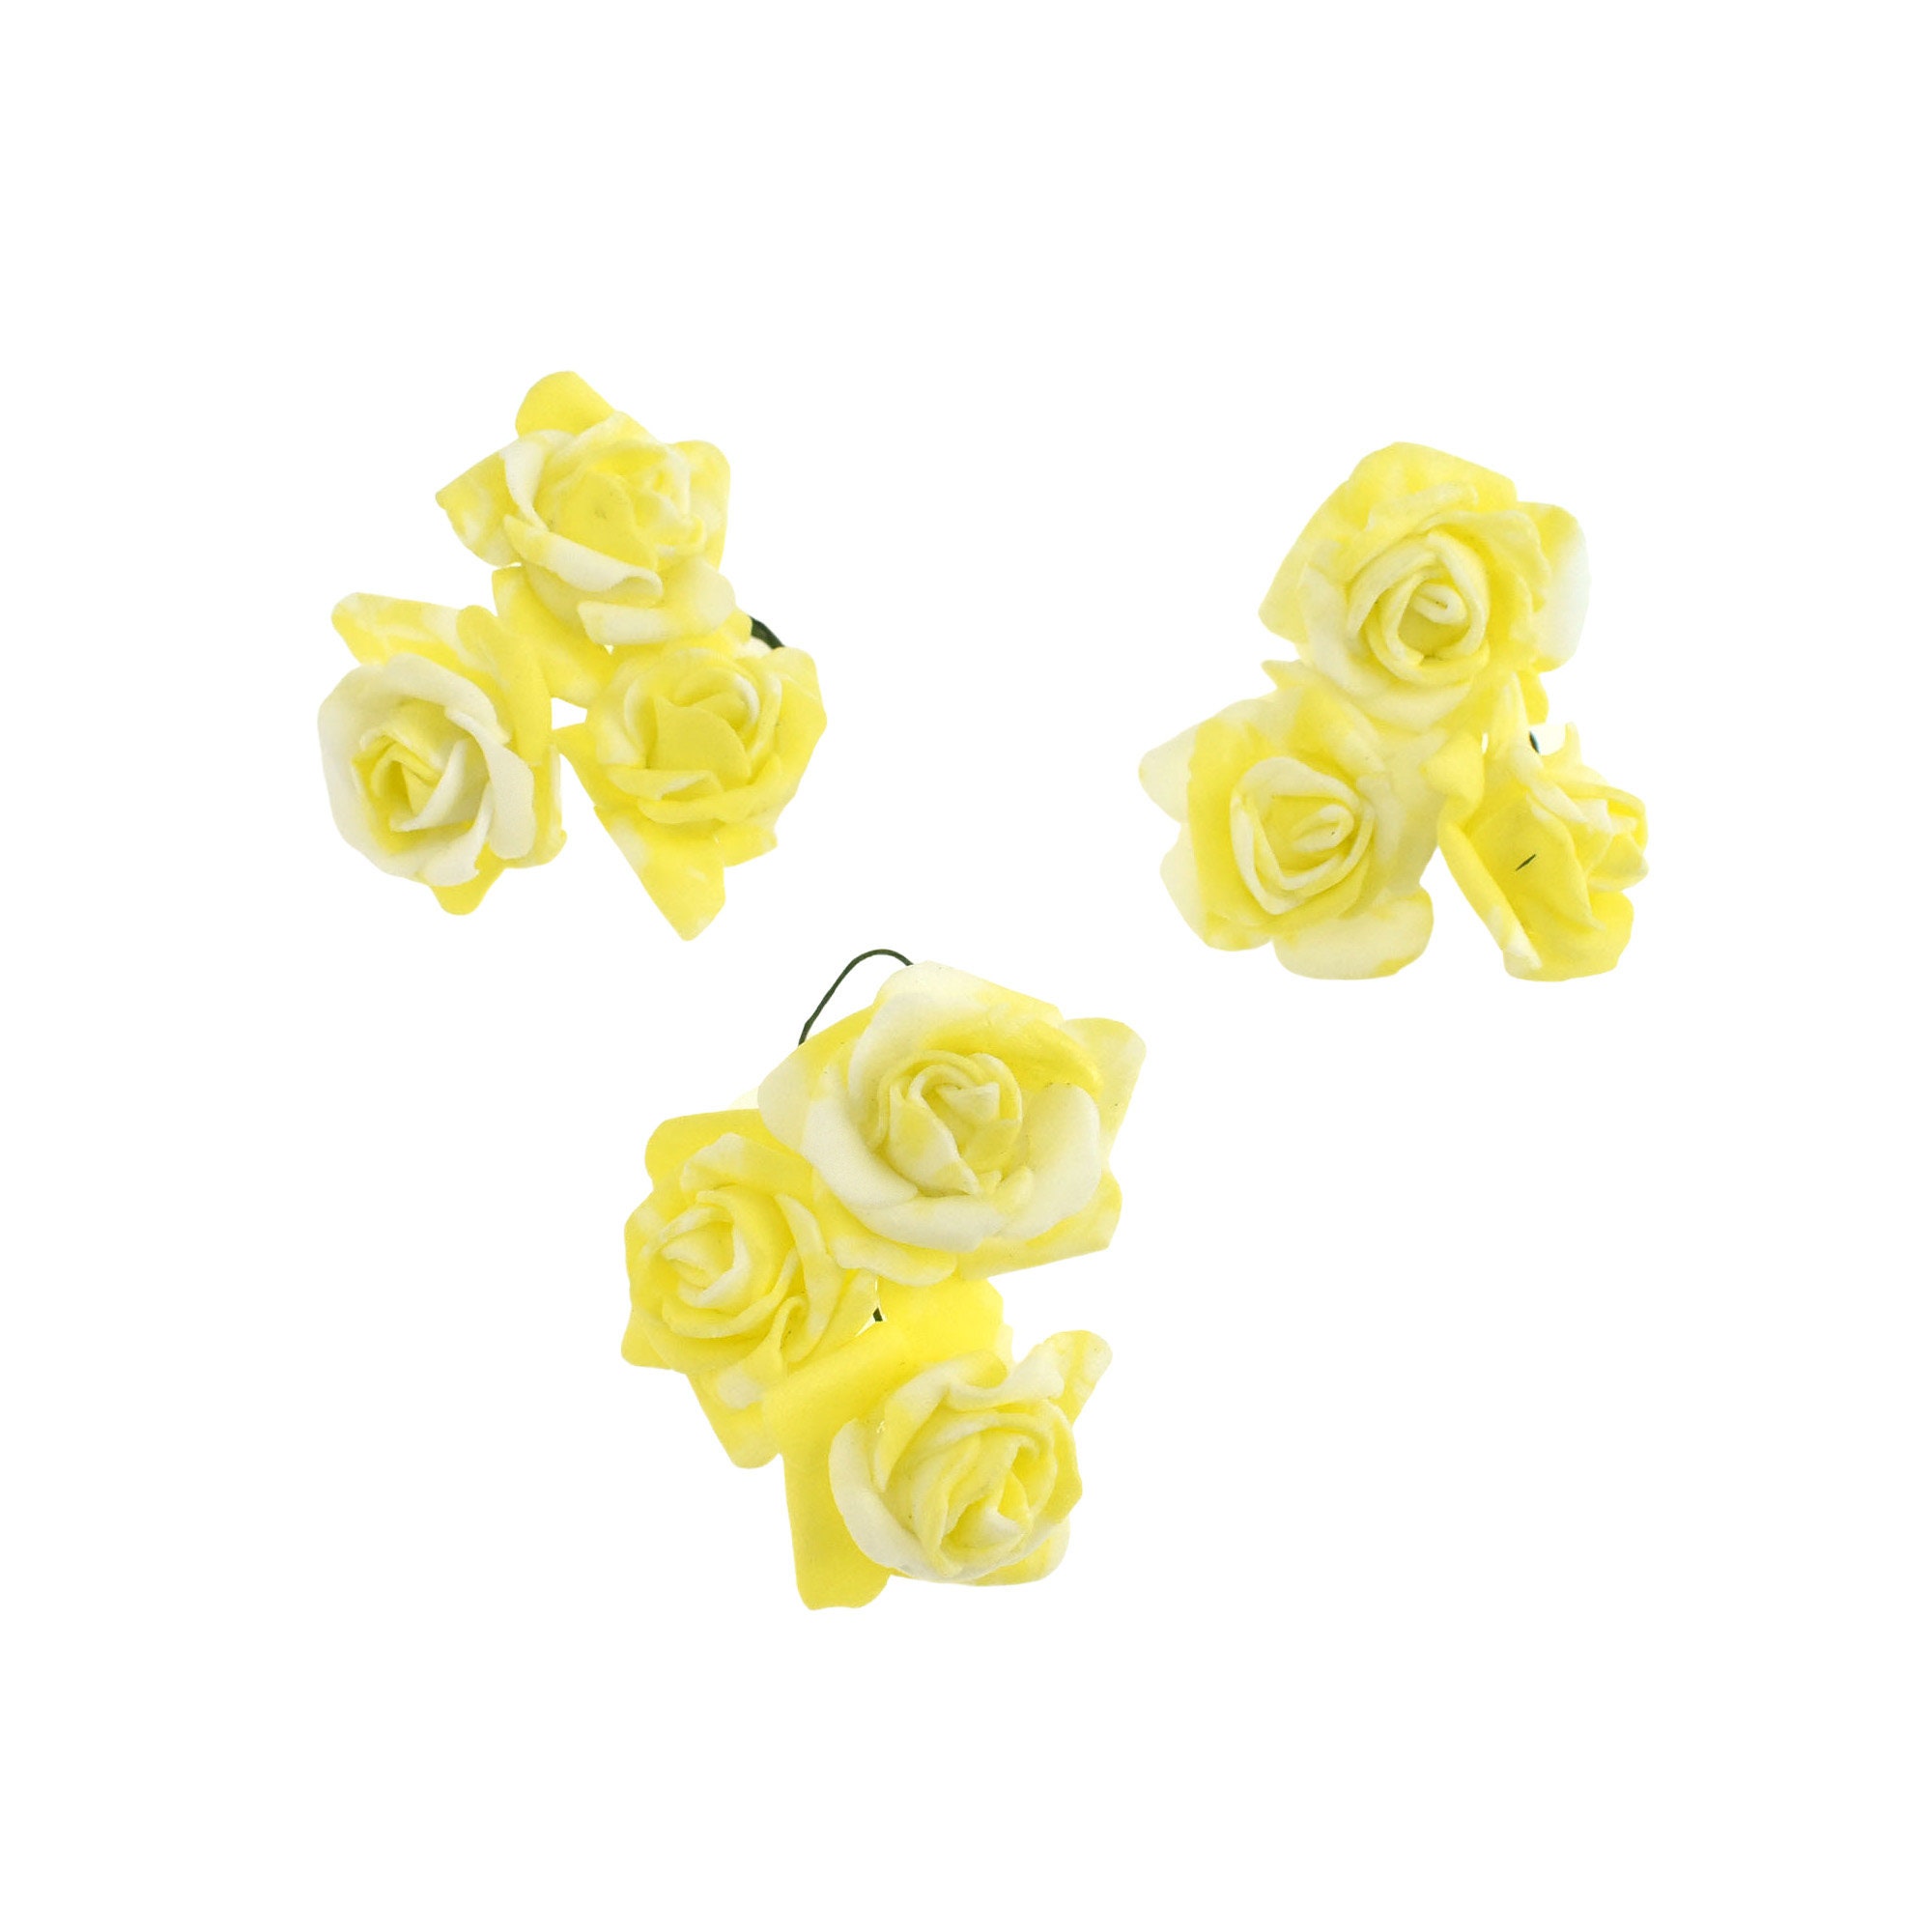 Foam Flowers With Twist Ties, 1-inch, 9-count -  Canada